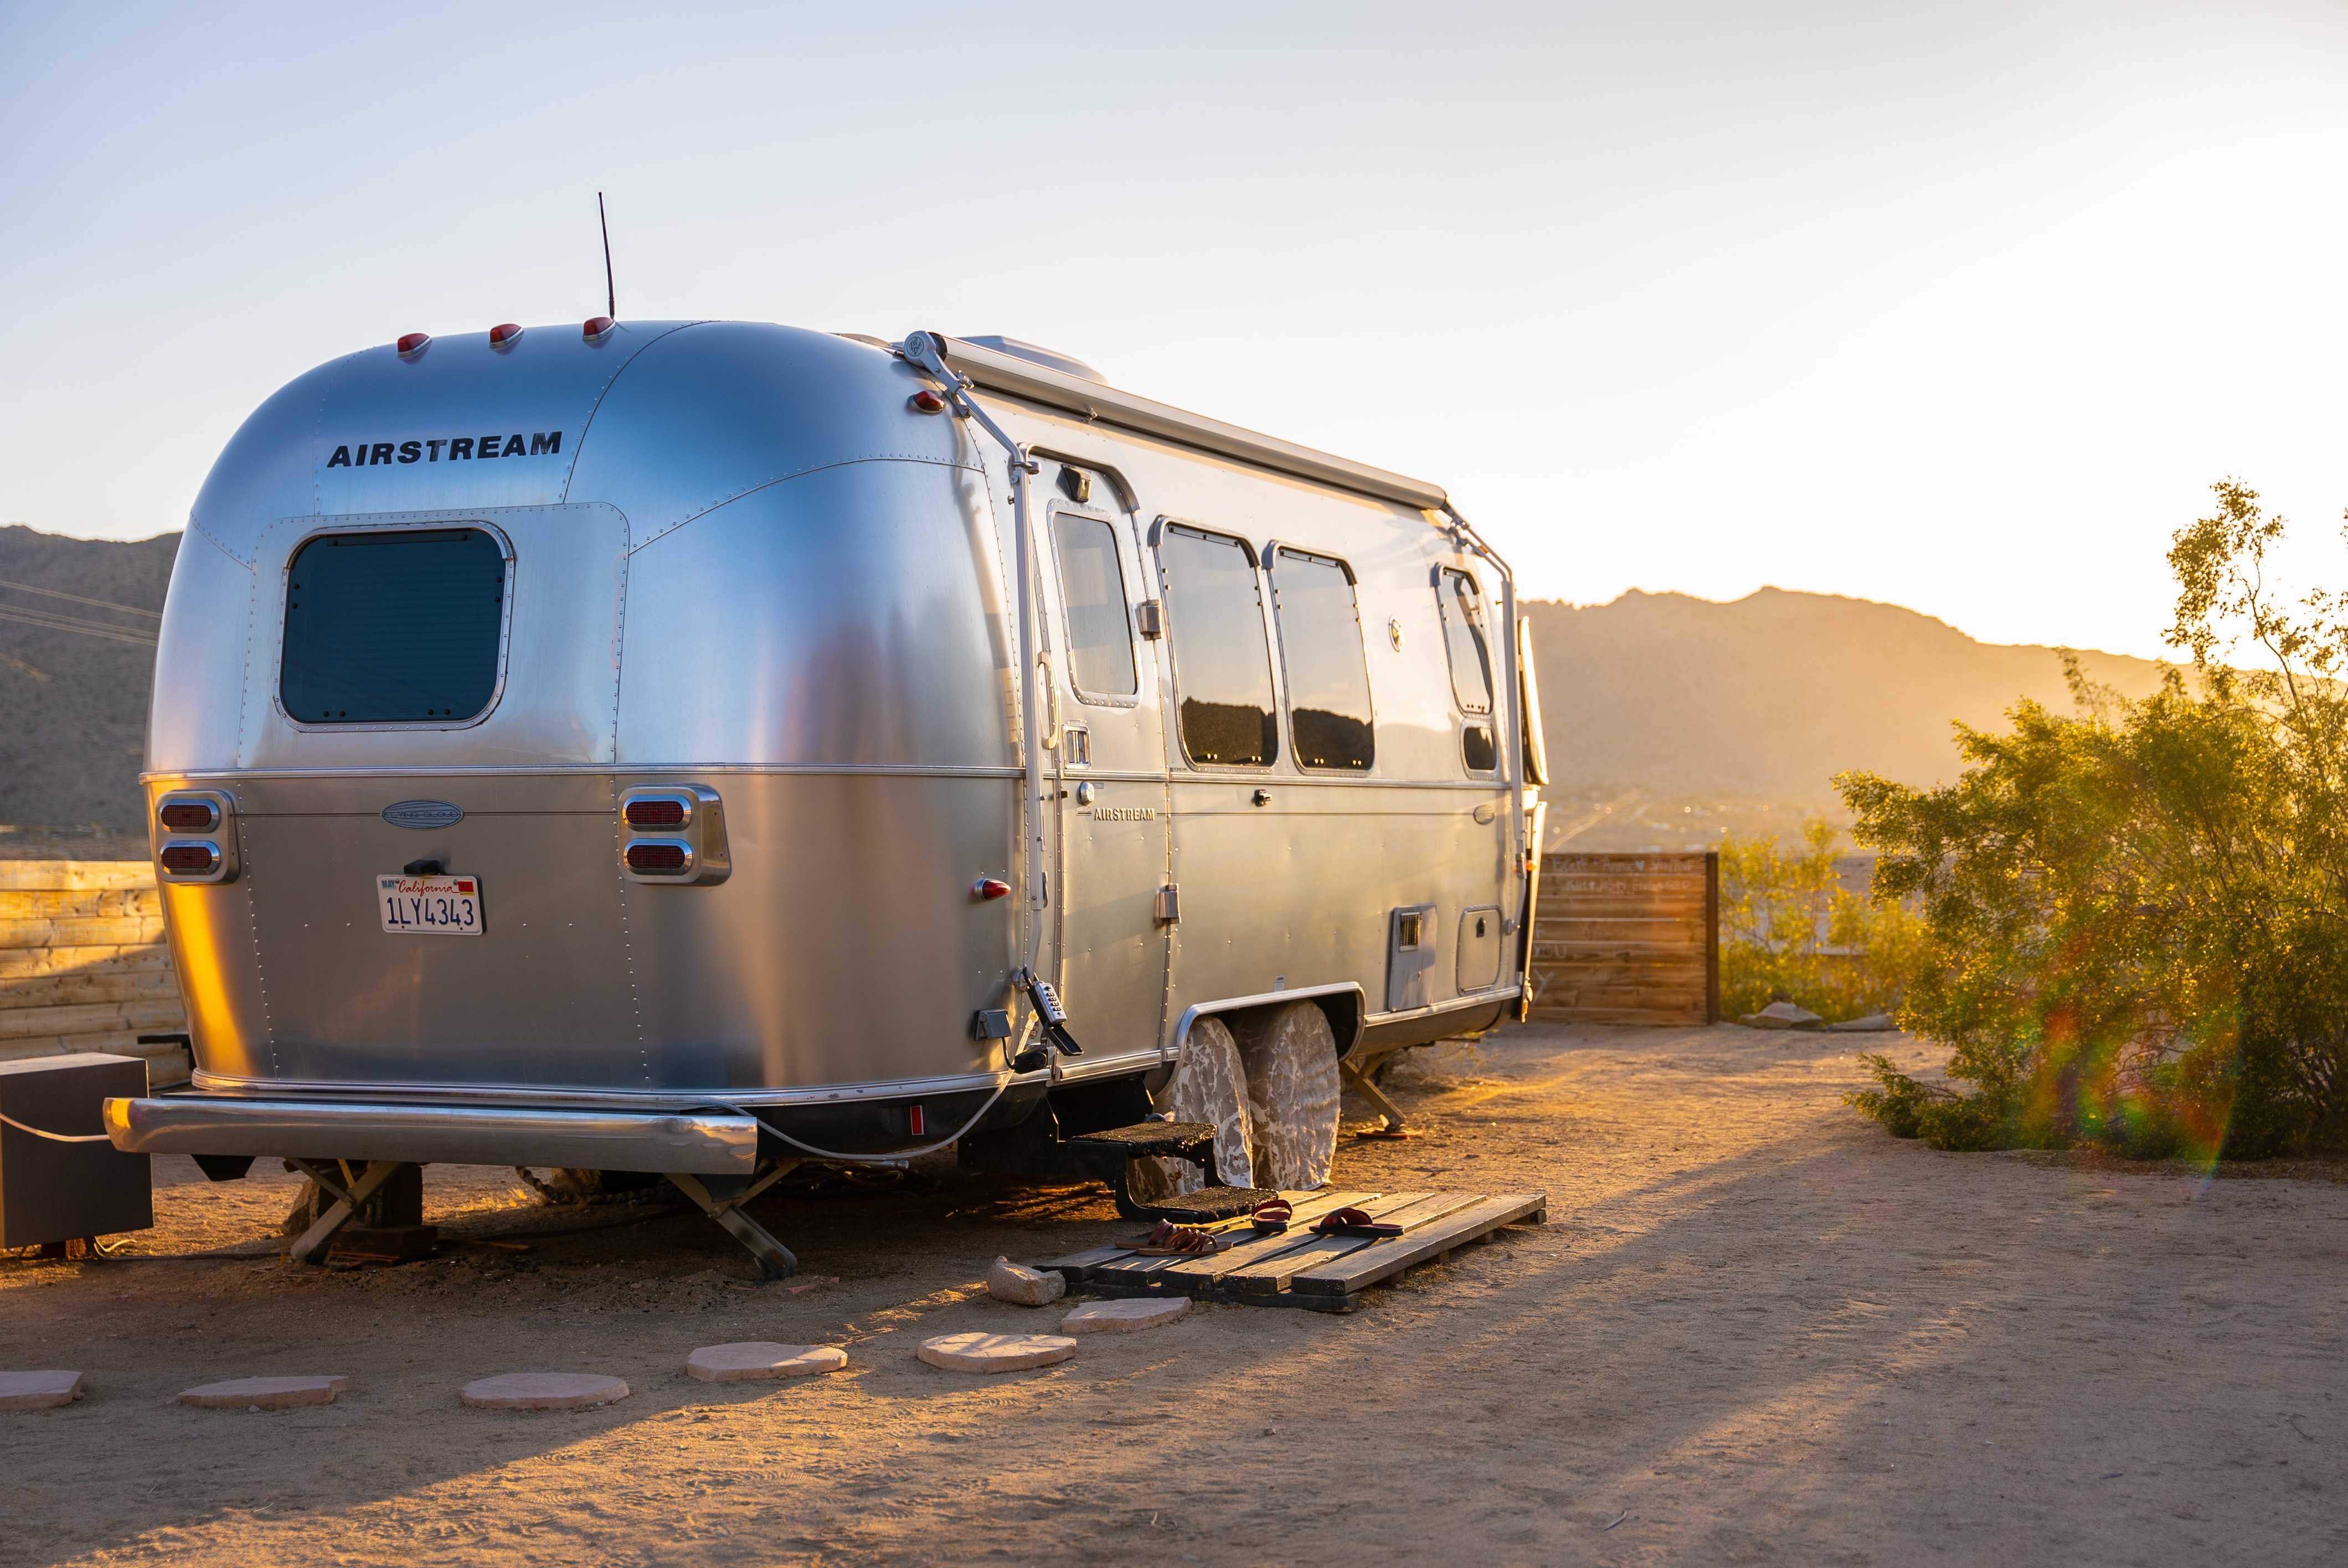 Retro caravans like Airstreams have become more popular in recent years (Tyler Casey / Unsplash)